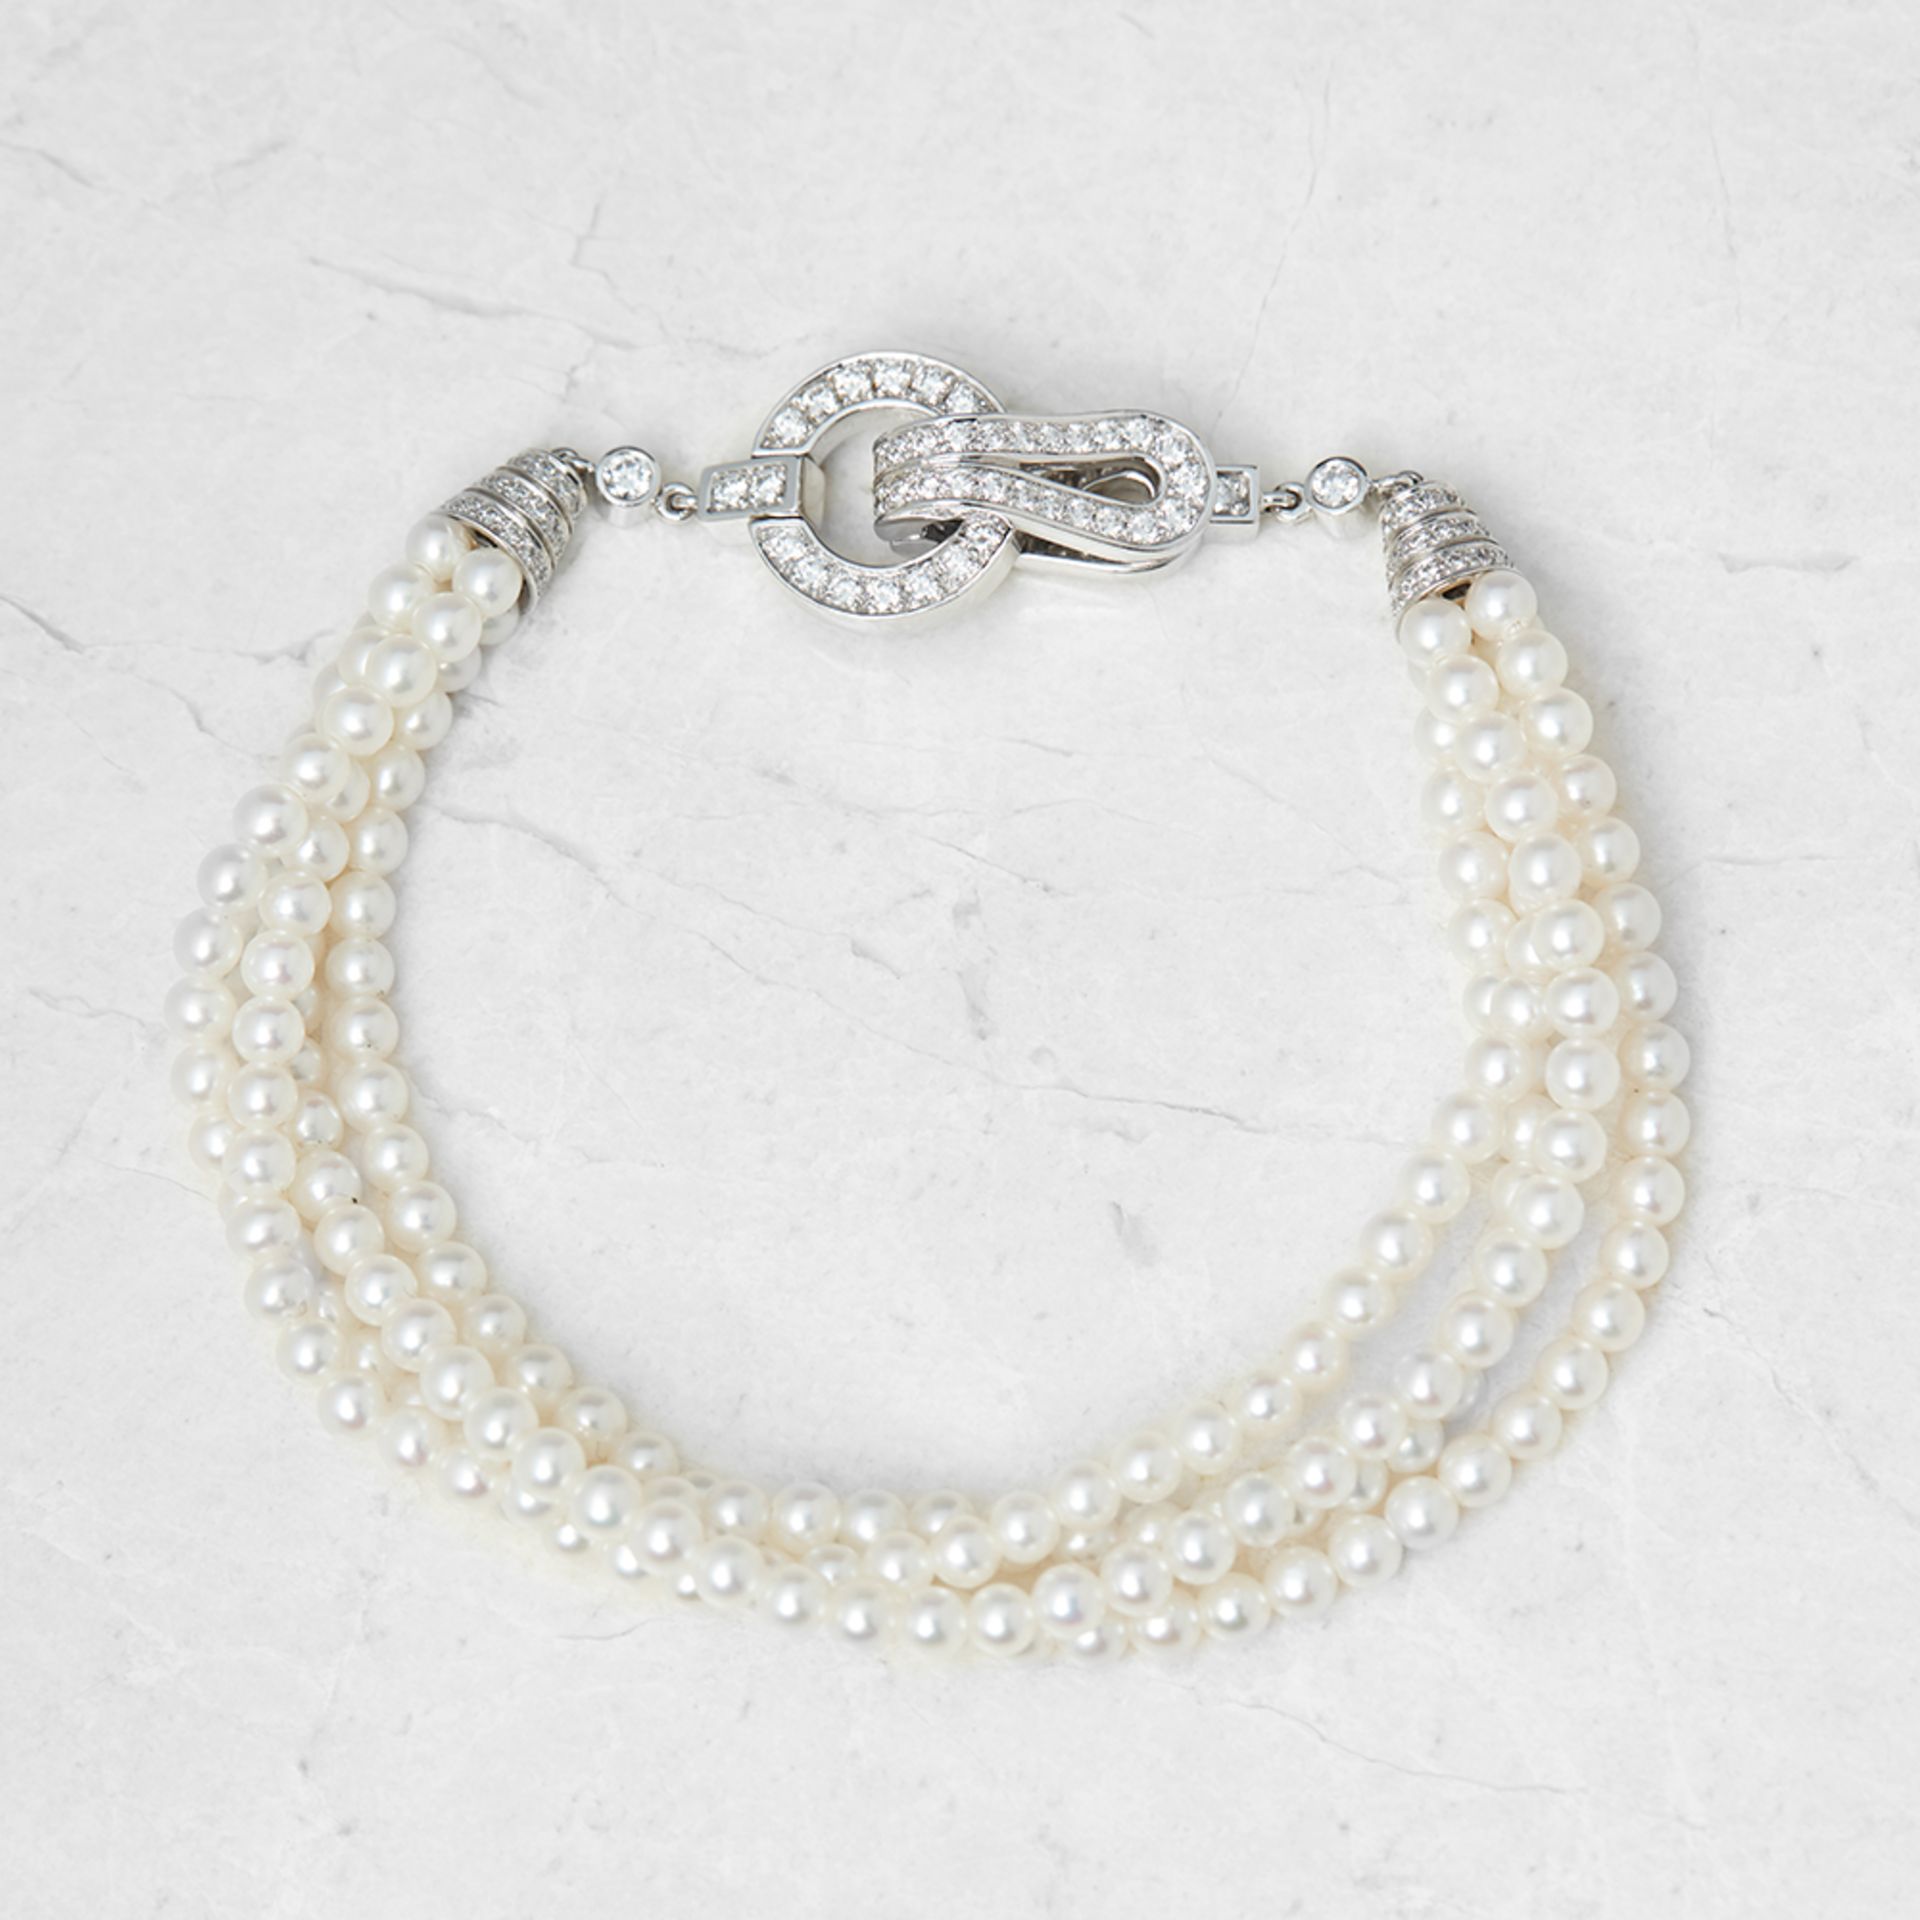 Cartier 18k White Gold Cultured Pearl & 1.02ct Diamond Agrafe Bracelet - Image 6 of 6